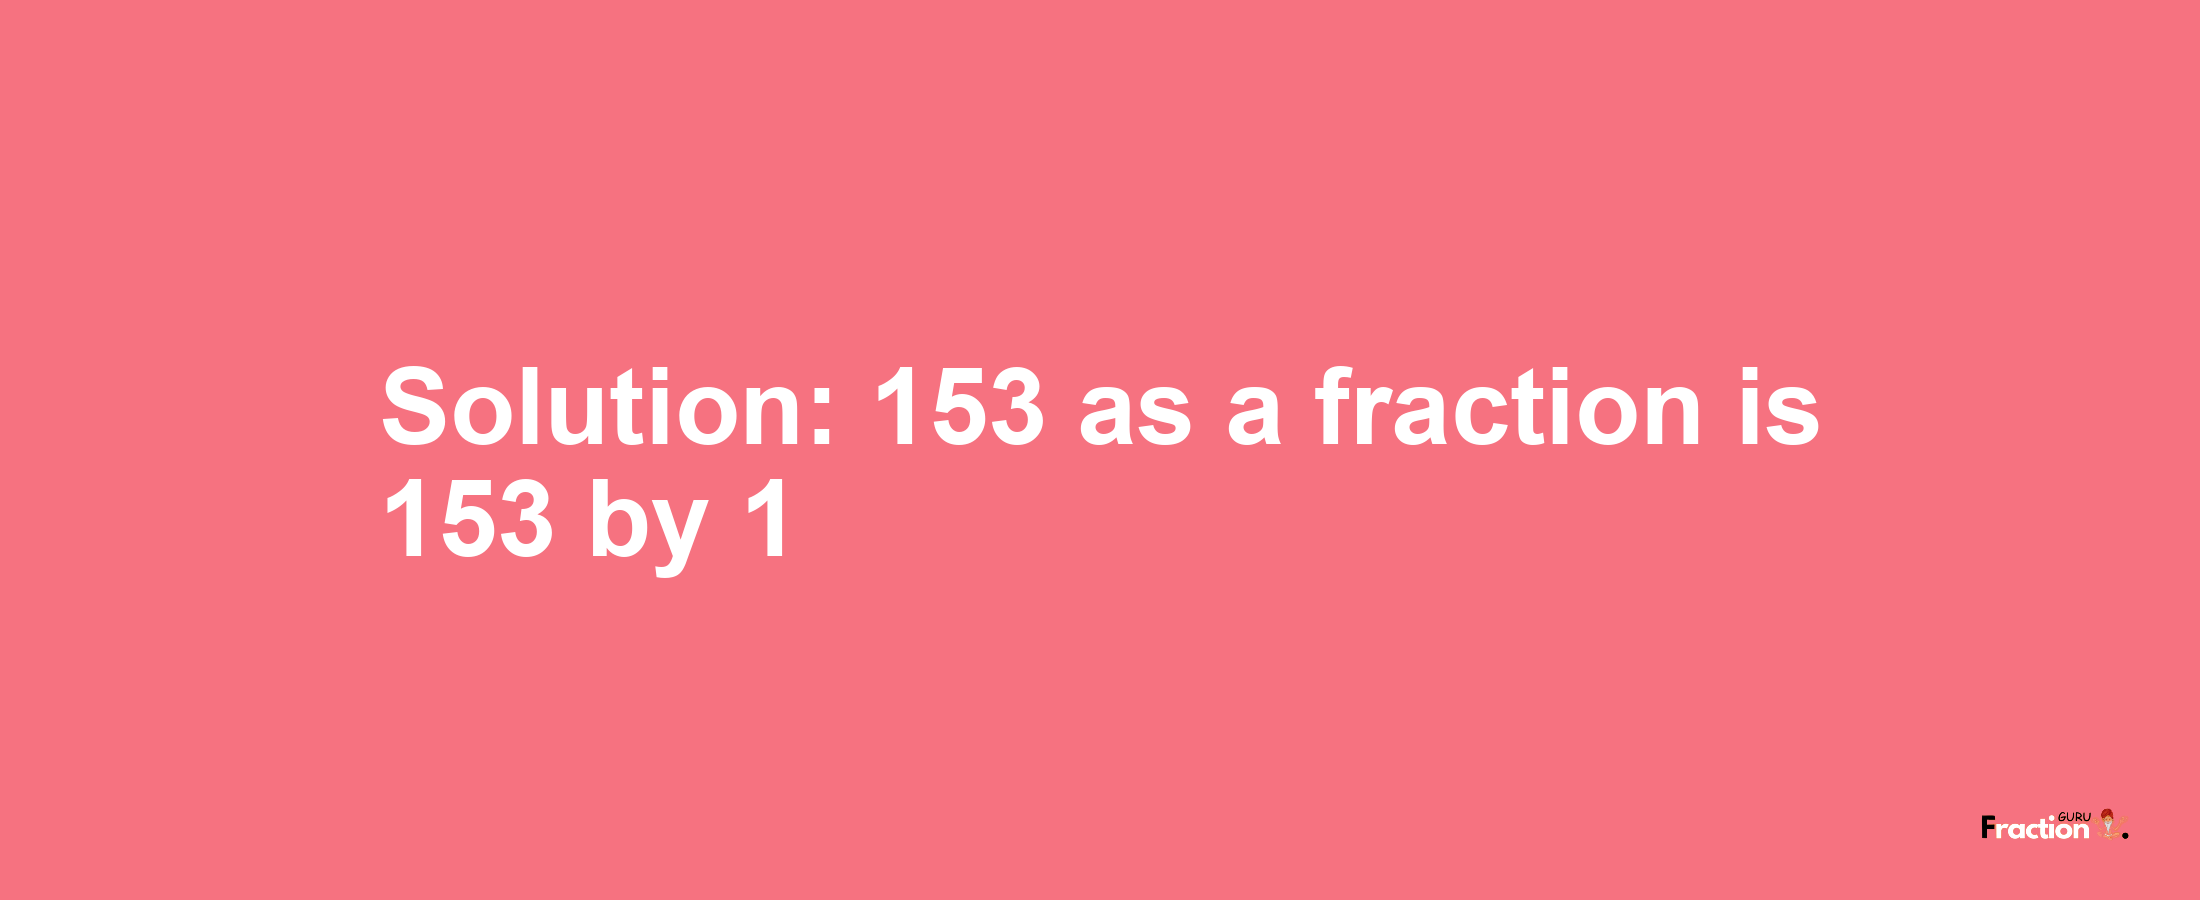 Solution:153 as a fraction is 153/1